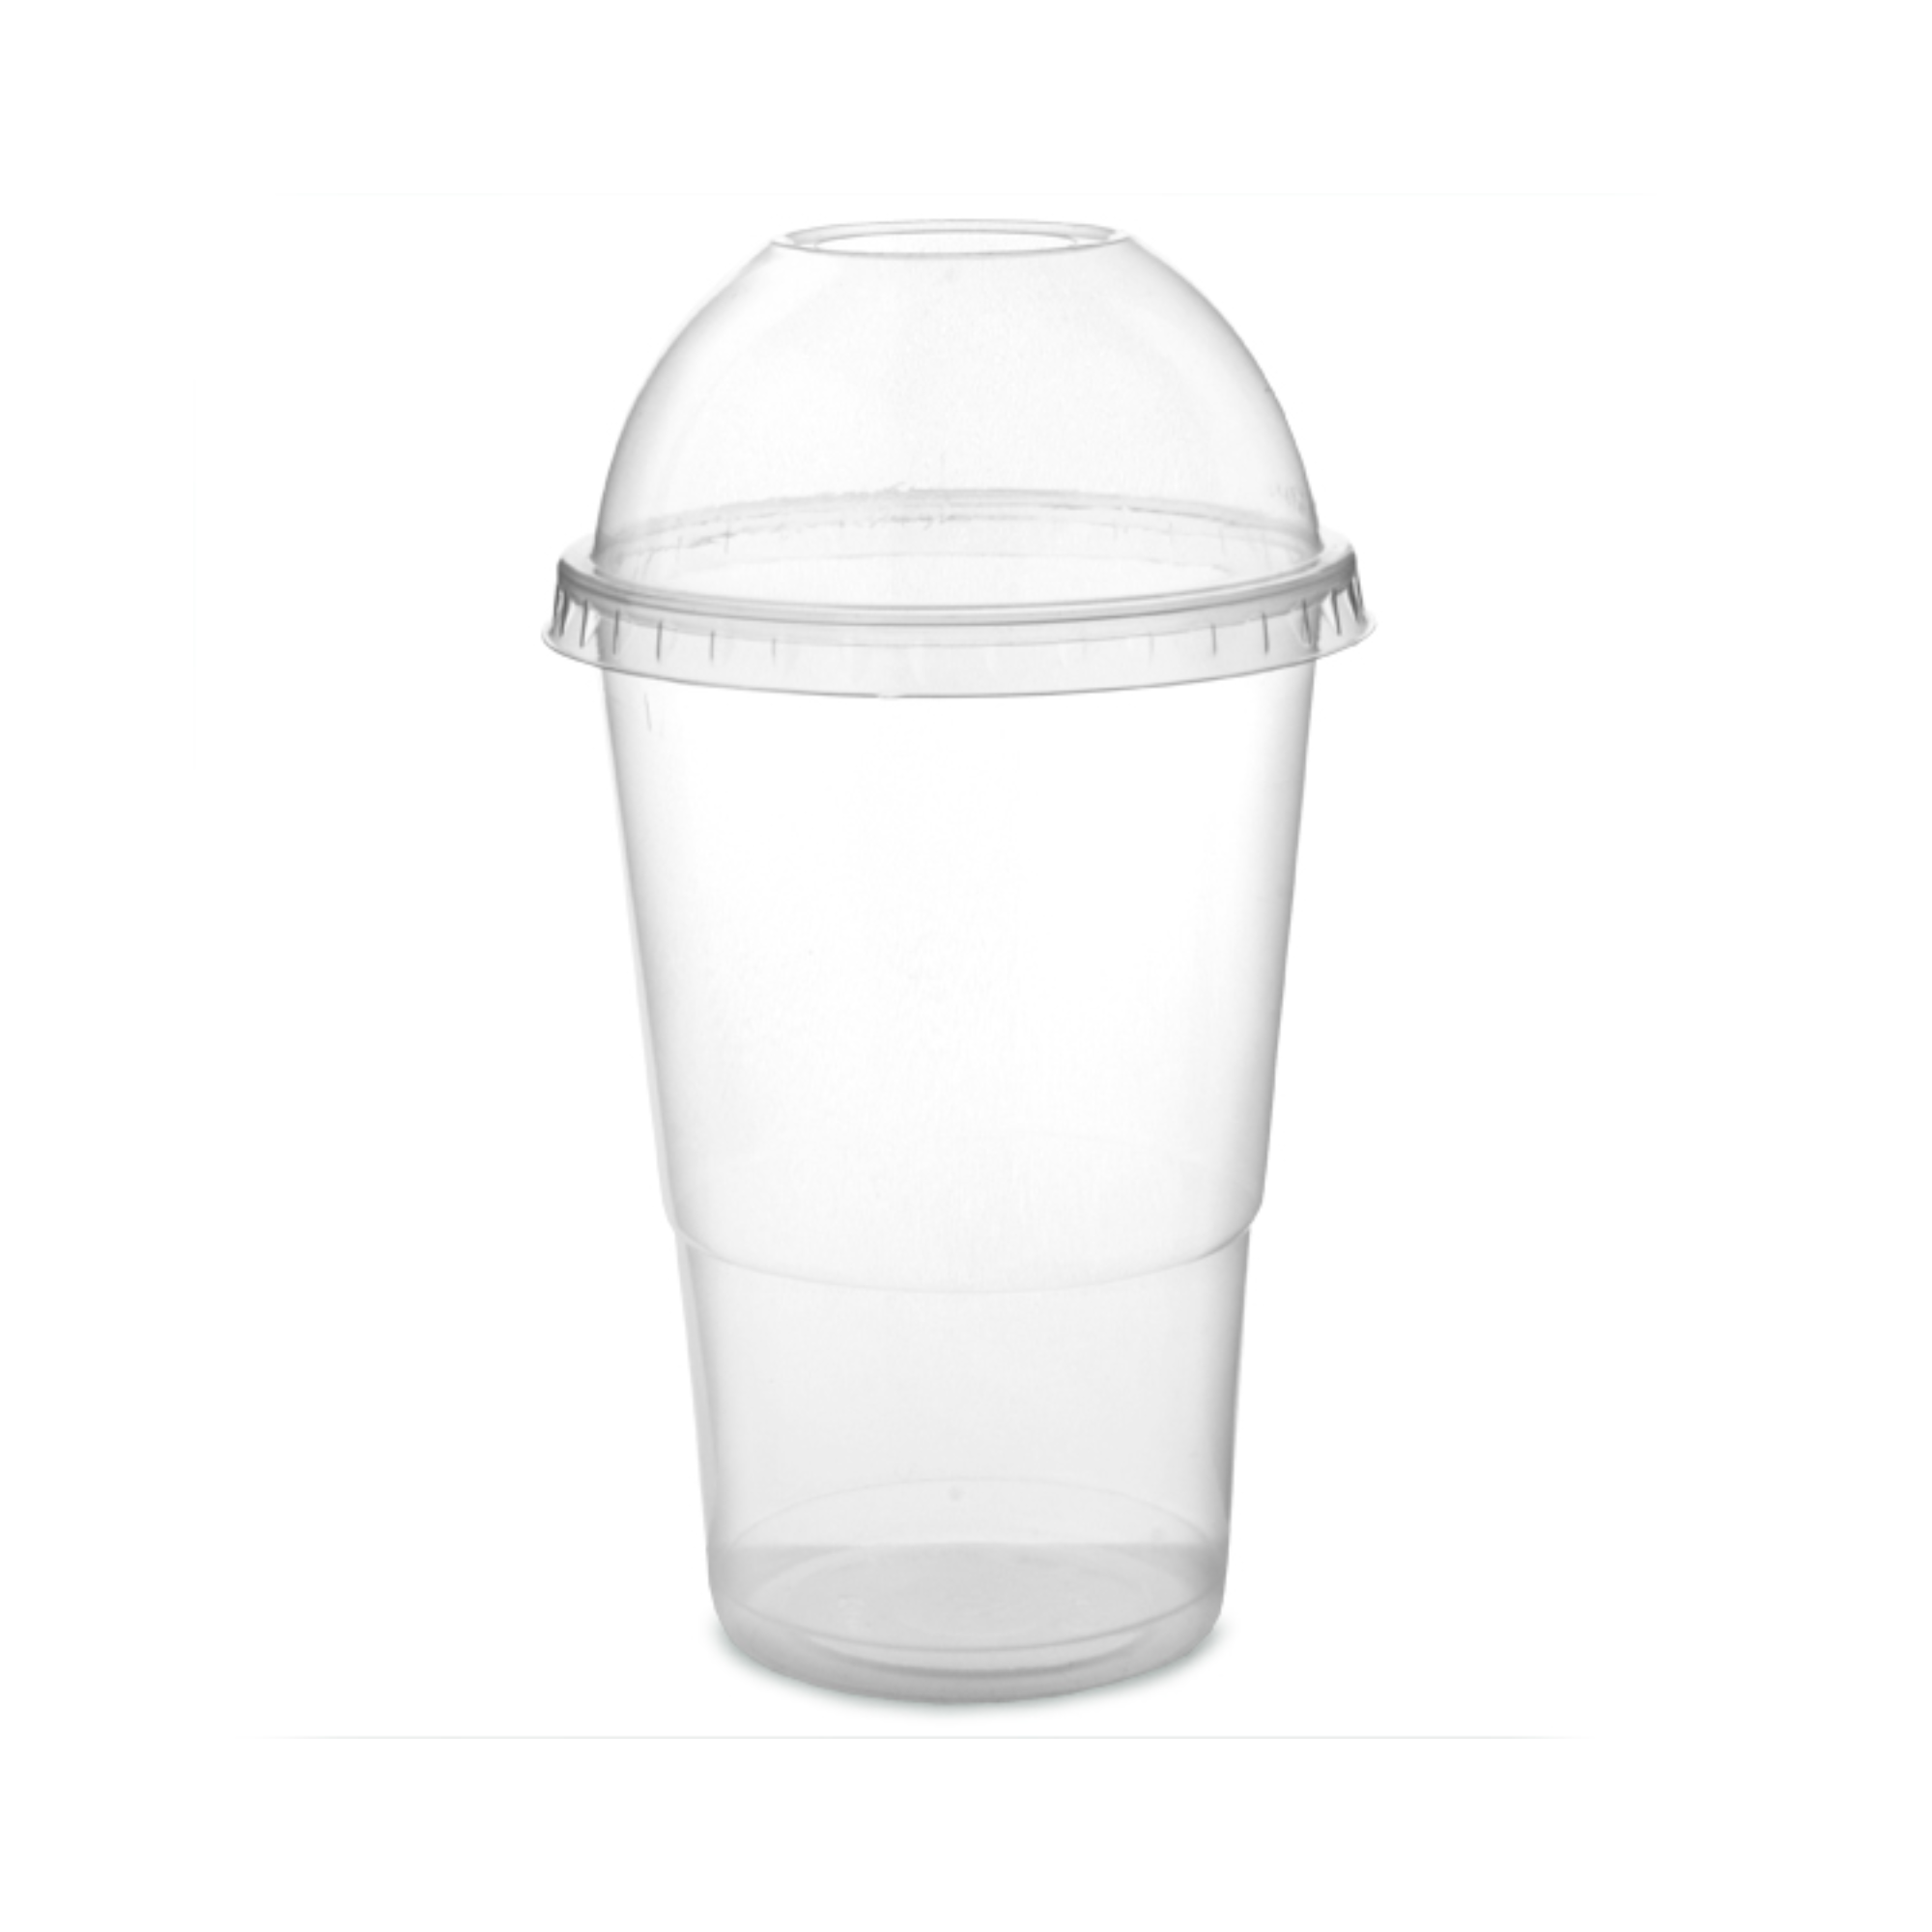 DISPOSABLE SMOOTHIE CUPS DOMED LIDS MILKSHAKE GLASSES PLASTIC GLASS PARTY  CUP